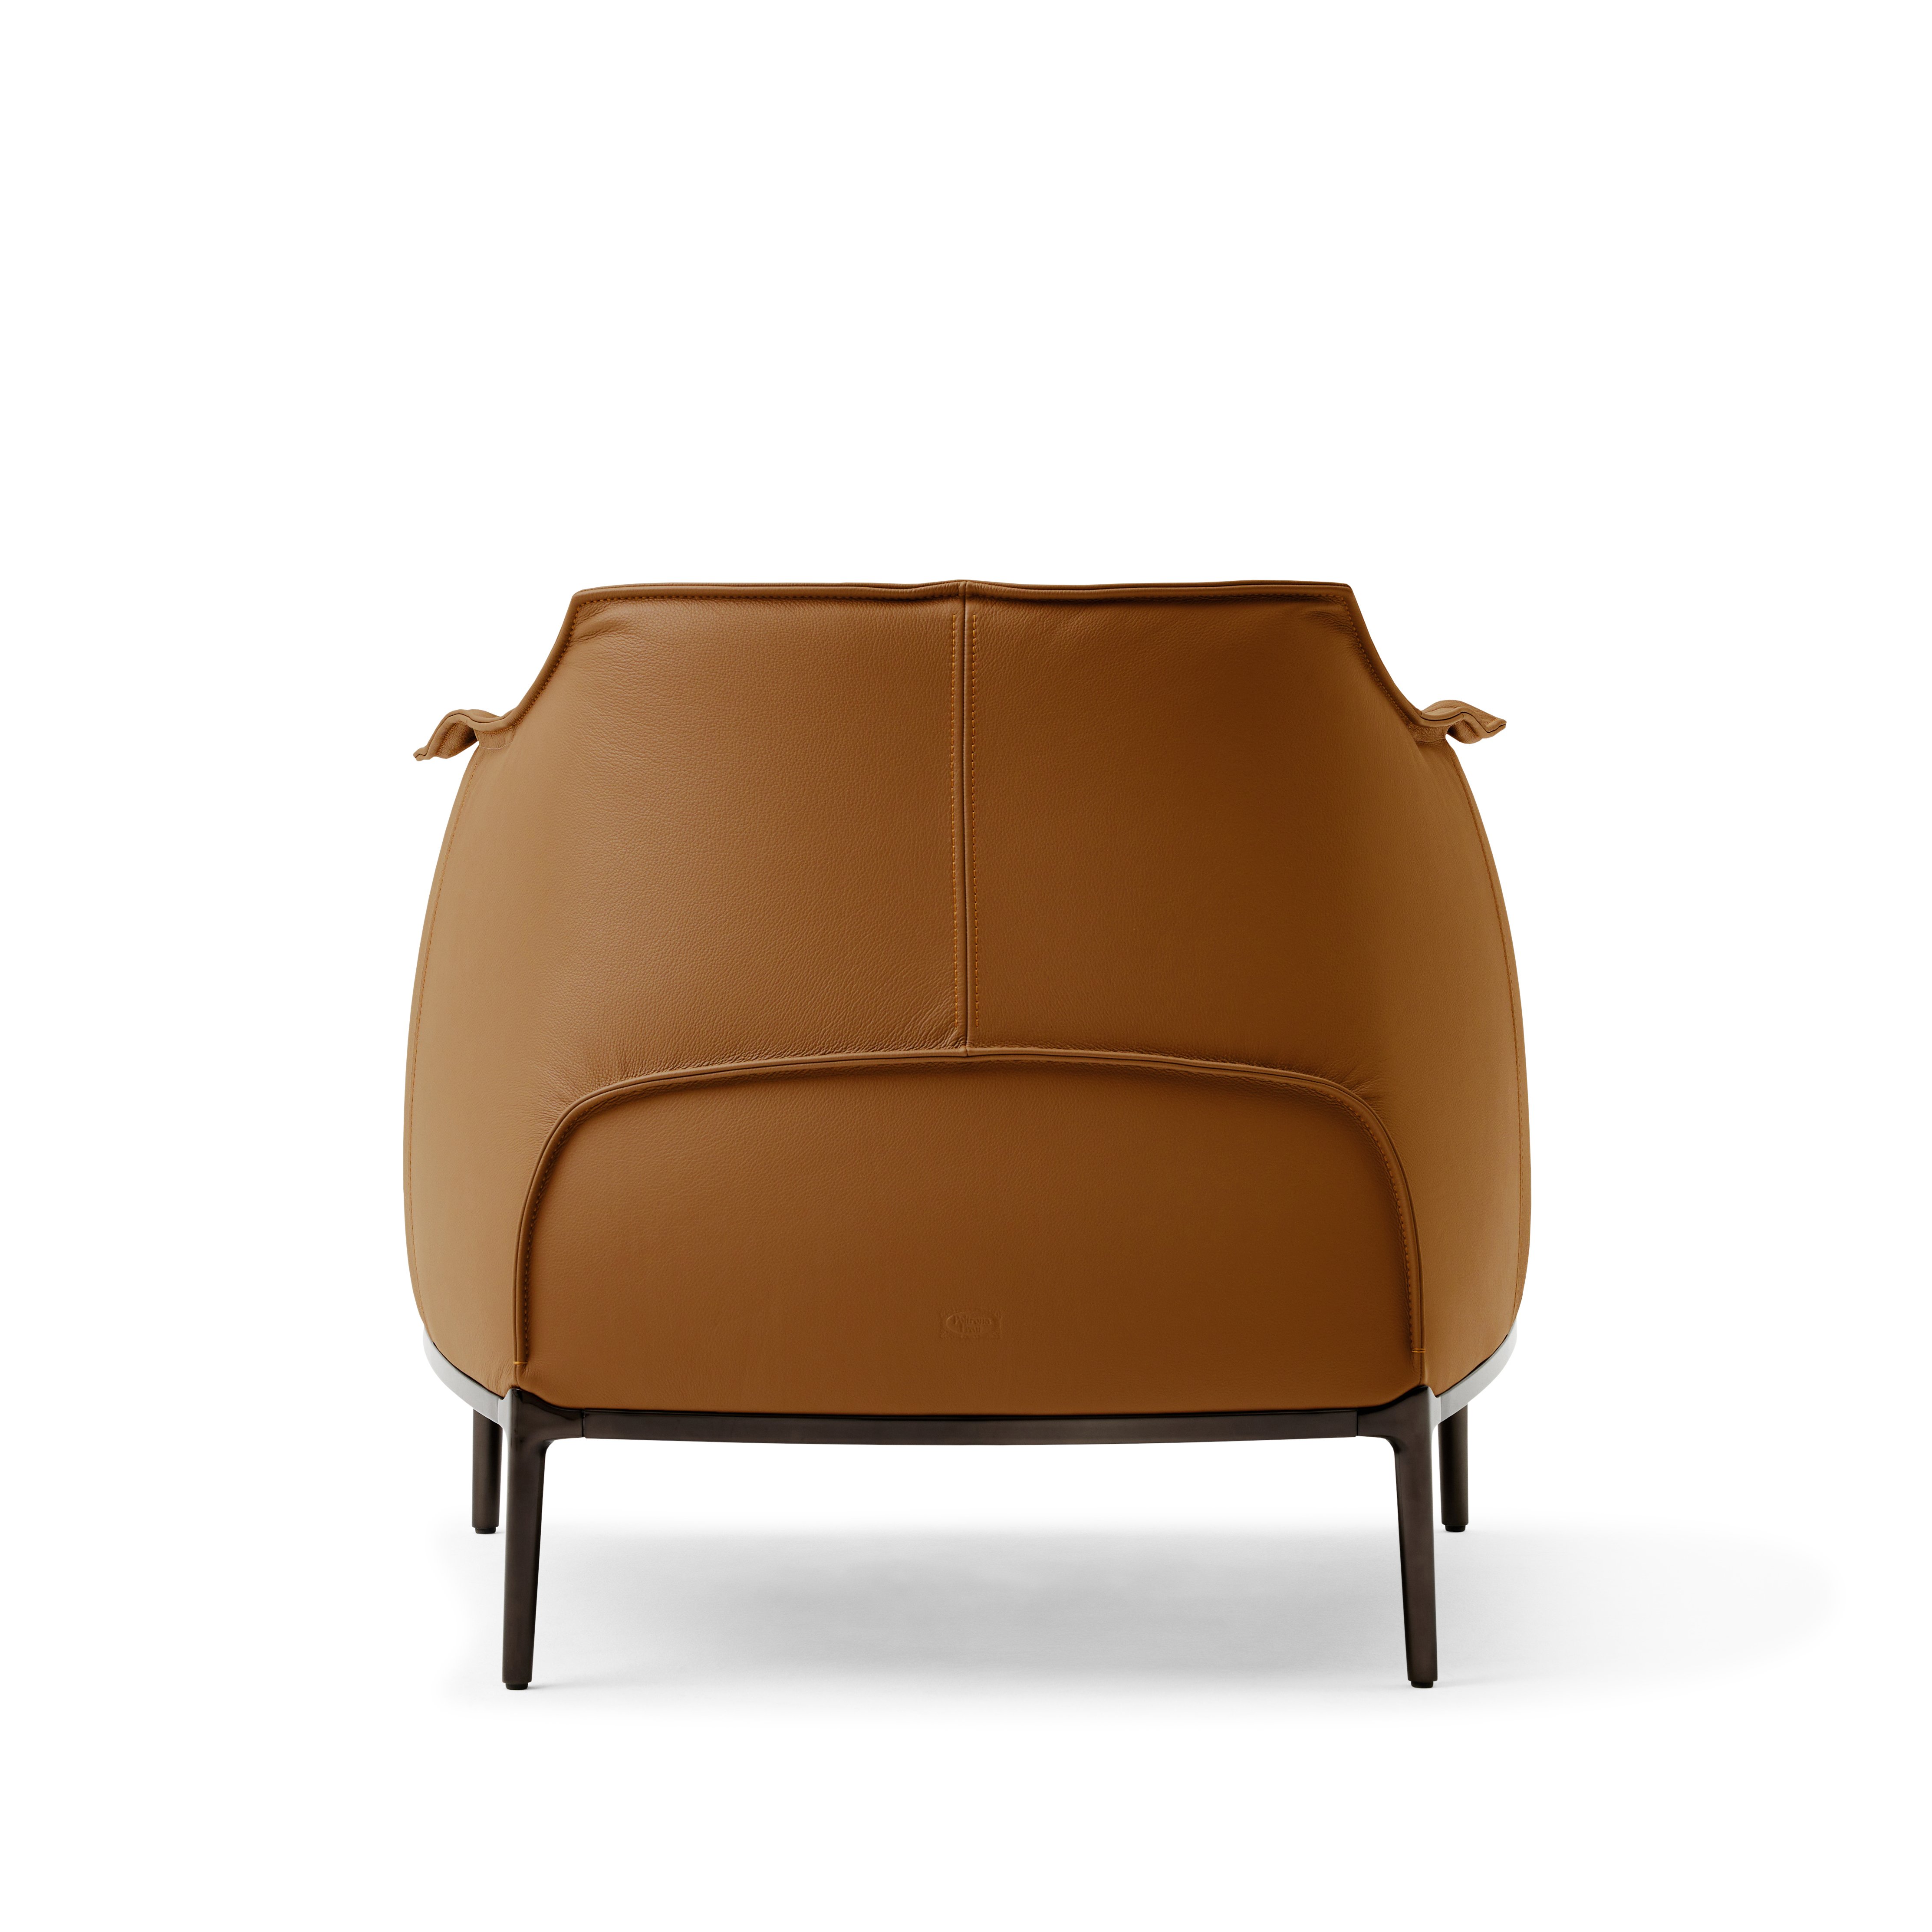 Detail back shot of the Archibald Lounge chair in Coffee